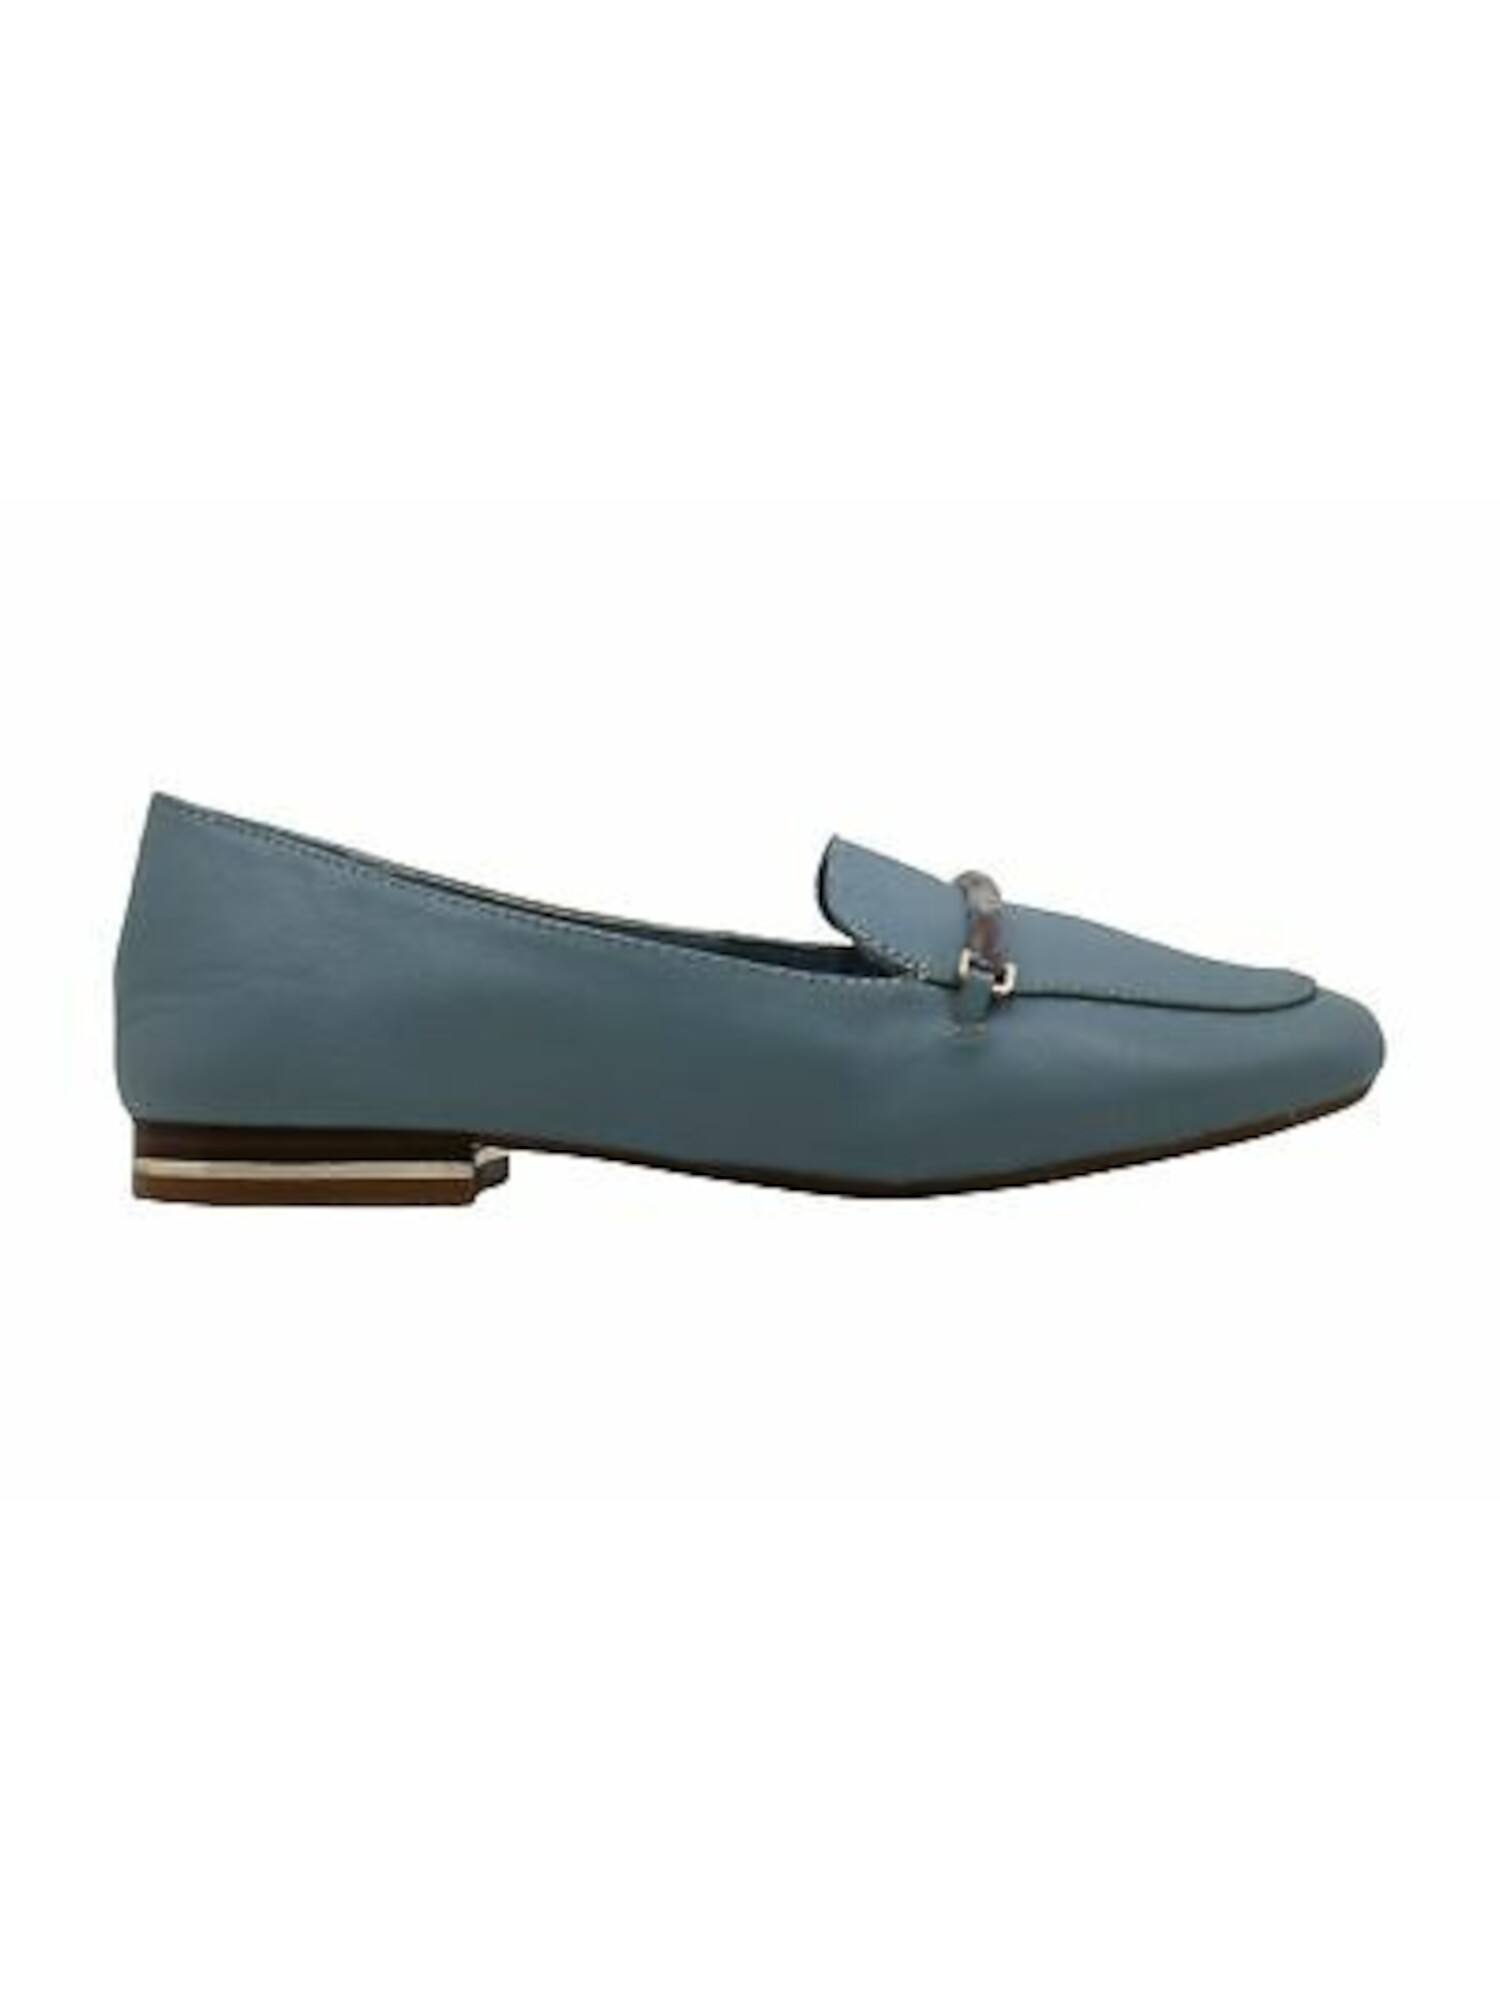 KENNETH COLE NEW YORK Womens Light Blue Balance Slip On Leather Loafers 8 M